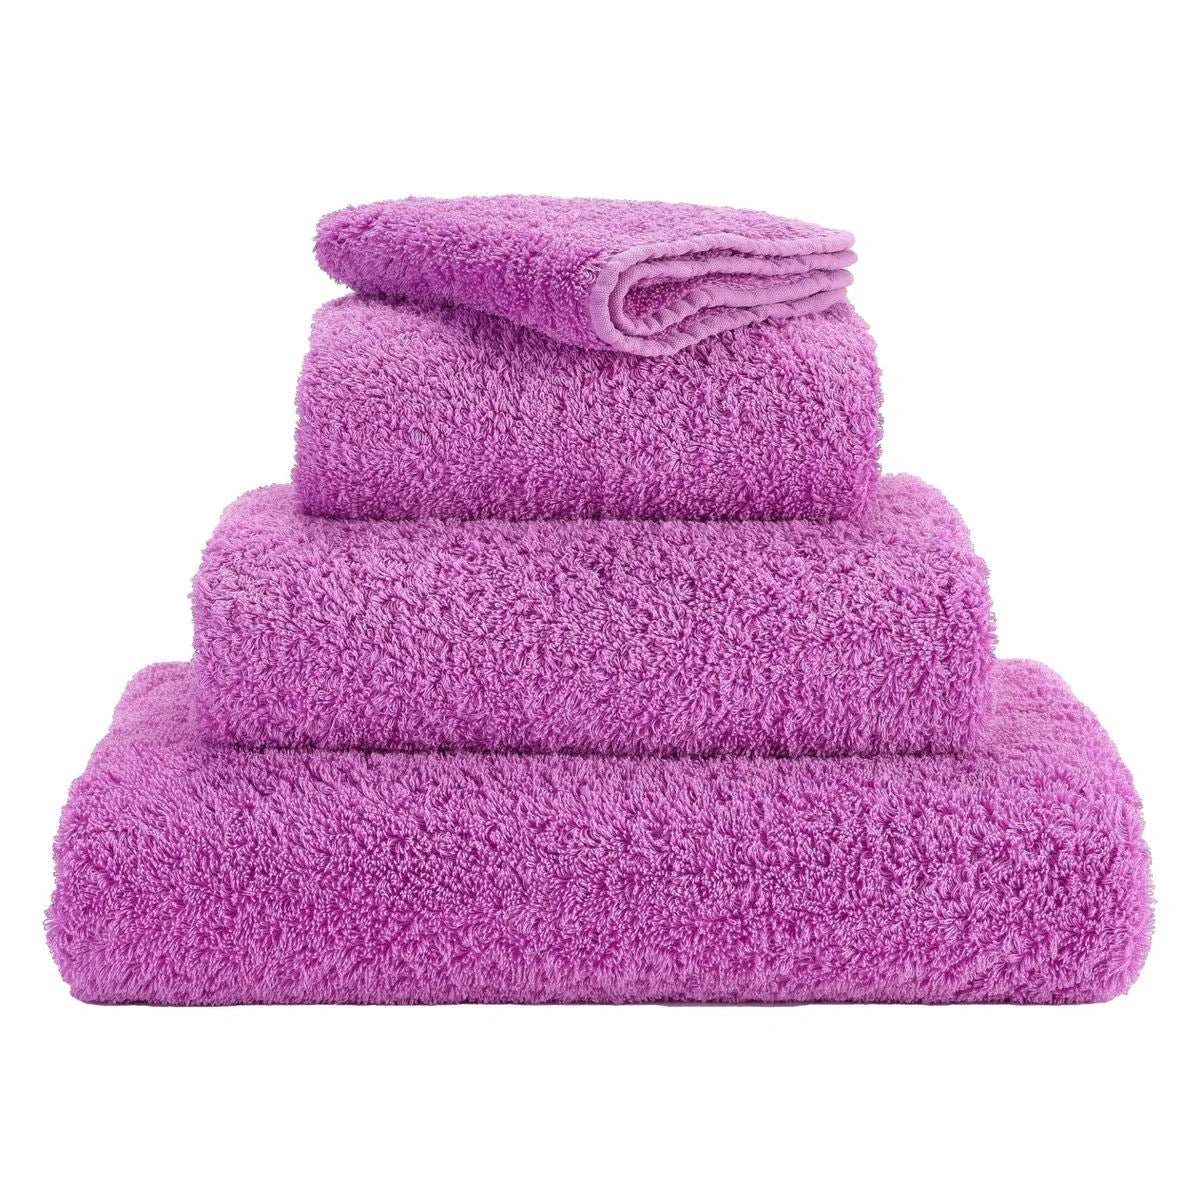 Super Pile Luxury Bath Towels by Abyss & Habidecor | 575 Cosmos - |VESIMI Design| Luxury and Rustic bathrooms online